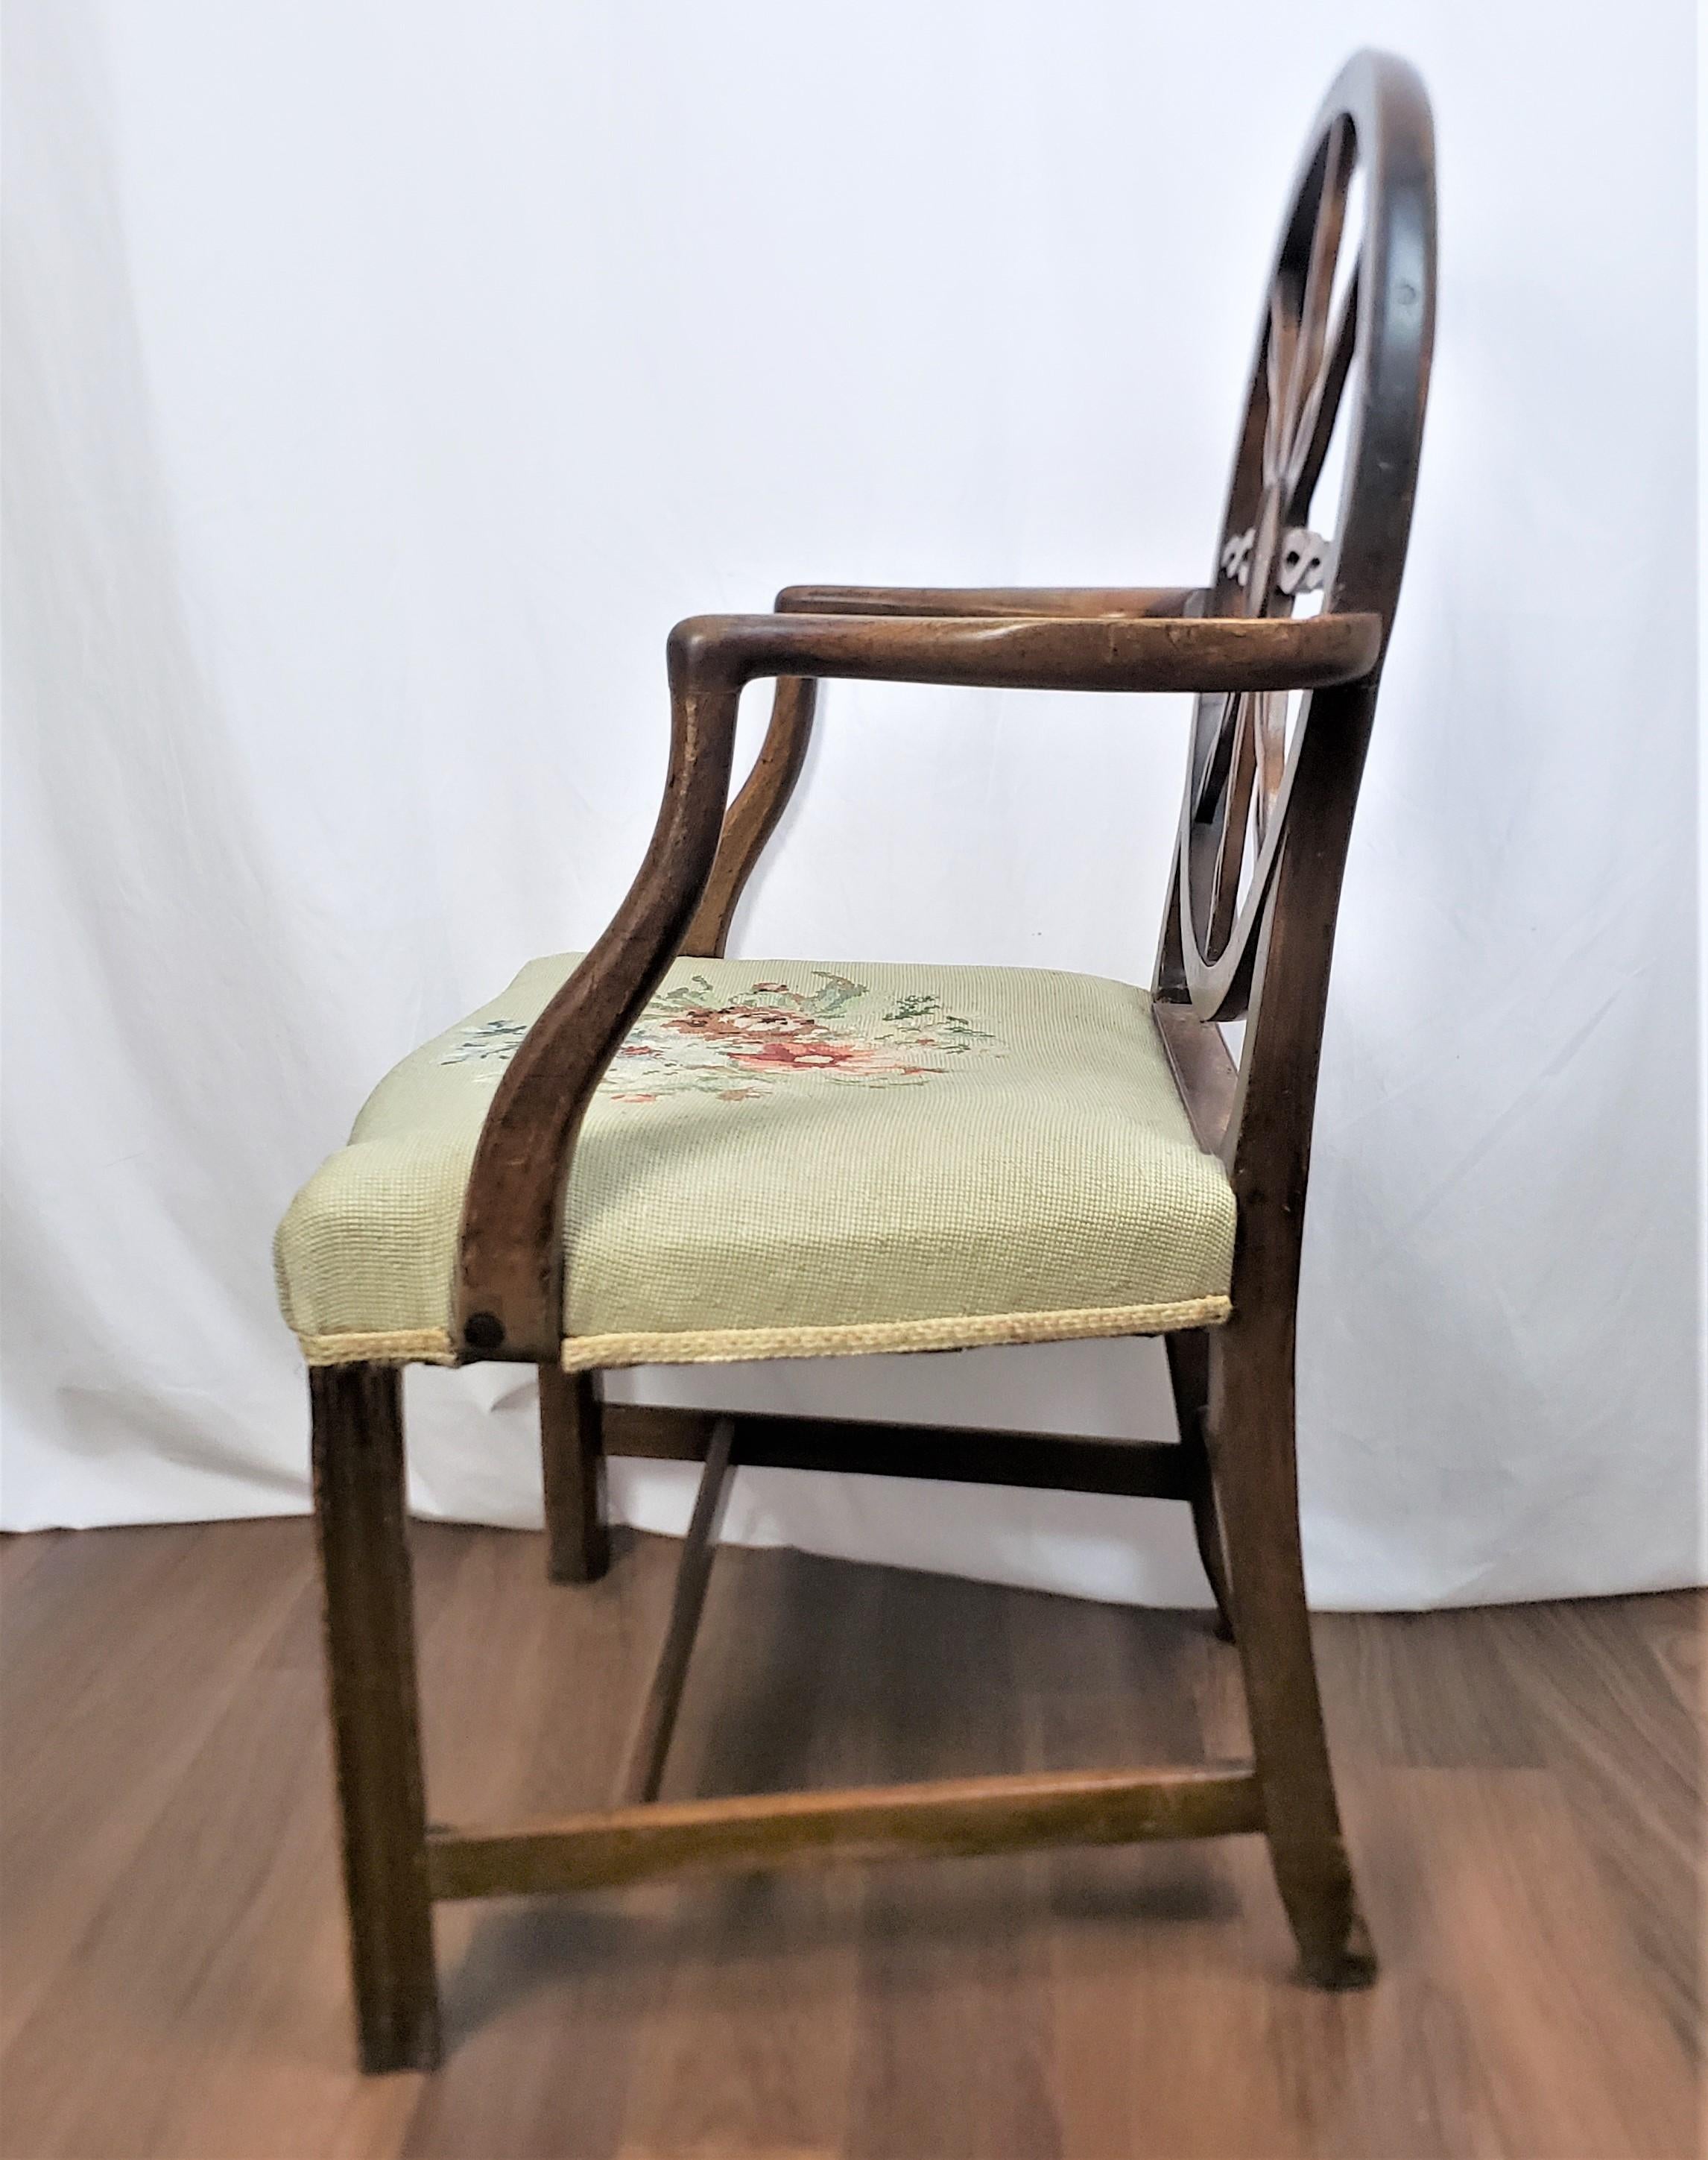 Hand-Crafted Antique King George III Period Wheelback Armchair or Side Chair Frame For Sale